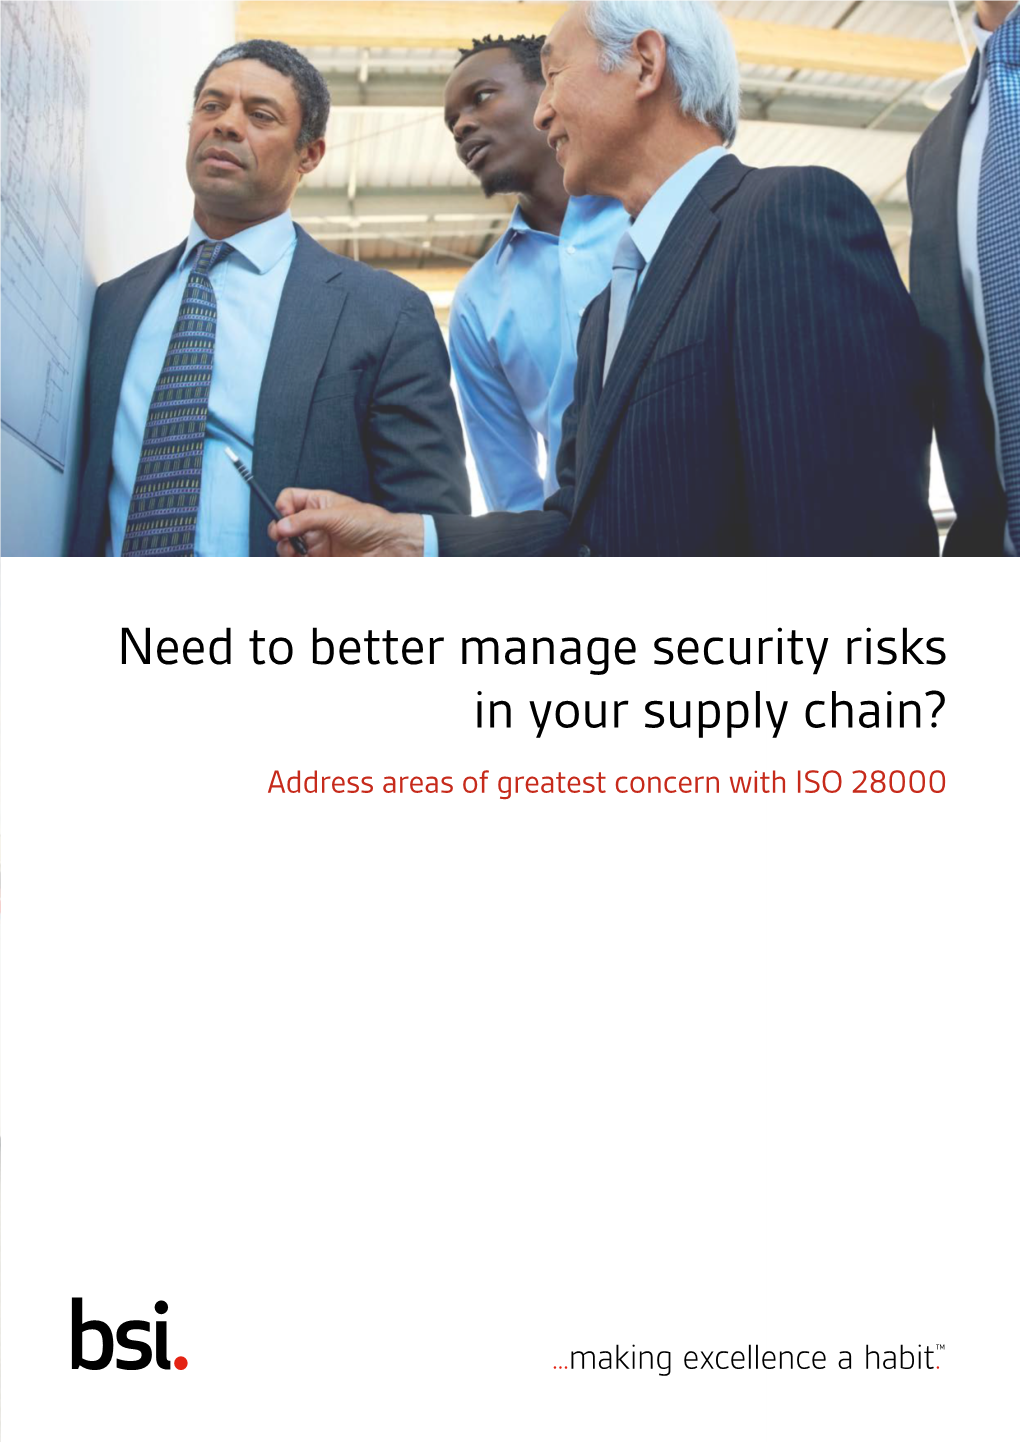 Need to Better Manage Security Risks in Your Supply Chain? Address Areas of Greatest Concern with ISO 28000 Give Your Business the Advantage and Win New Business